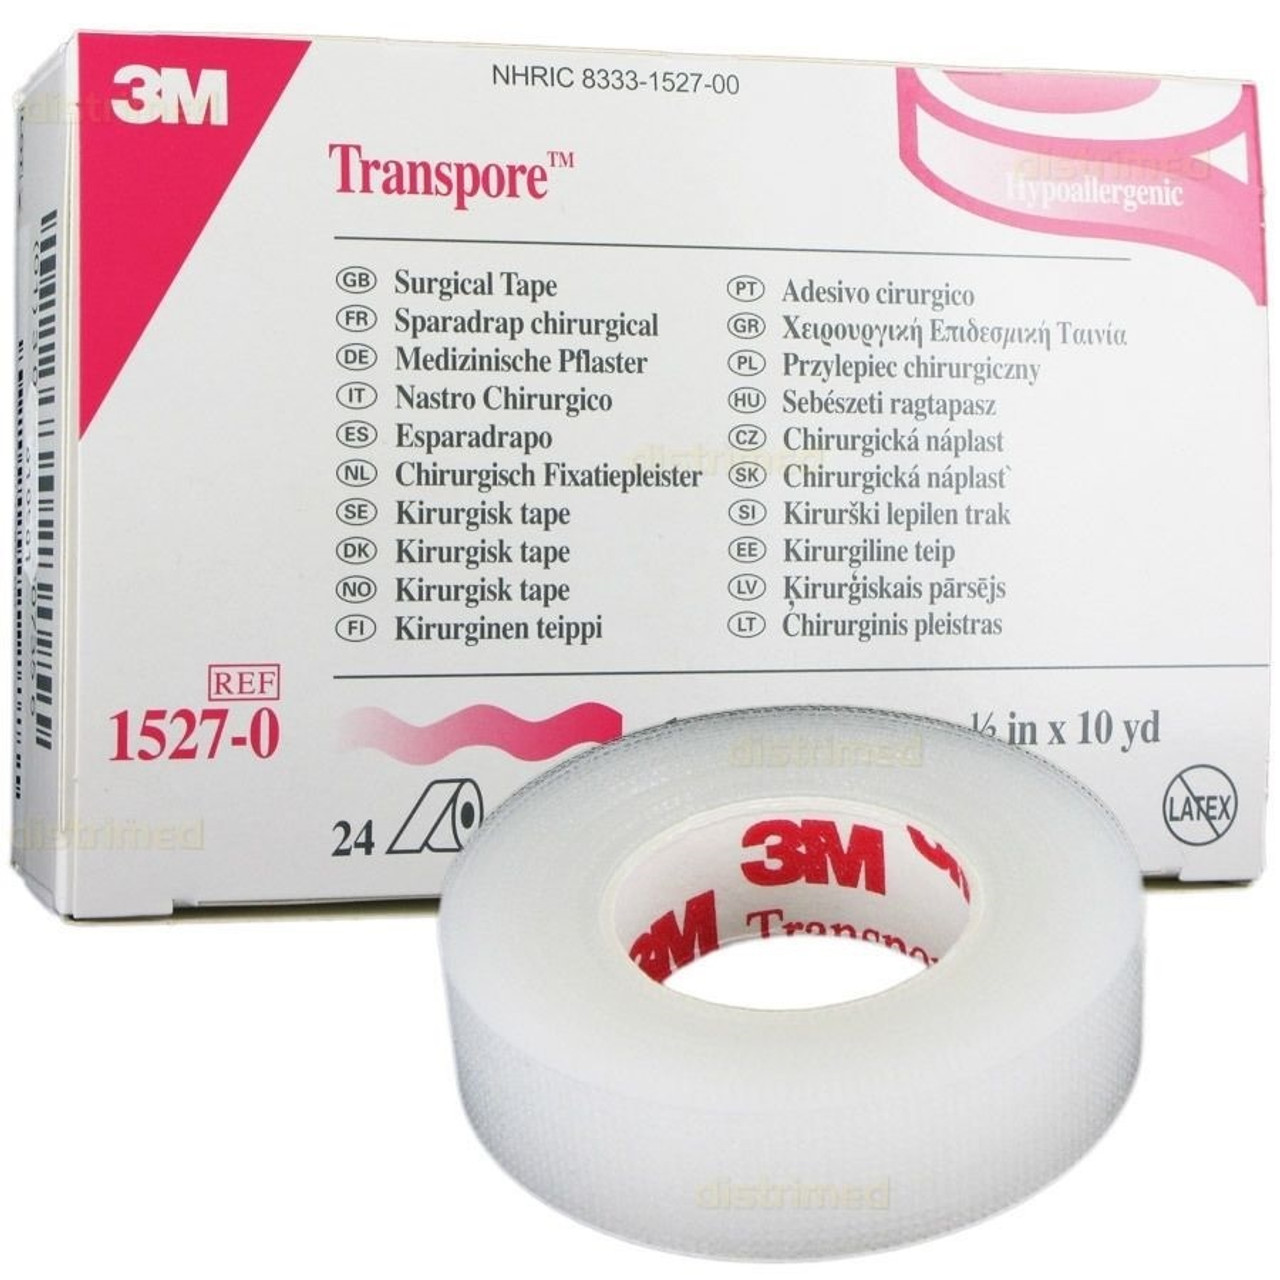 3M Transpore Surgical Tape, 2 Inch X 10 Yard (Pack of 6)